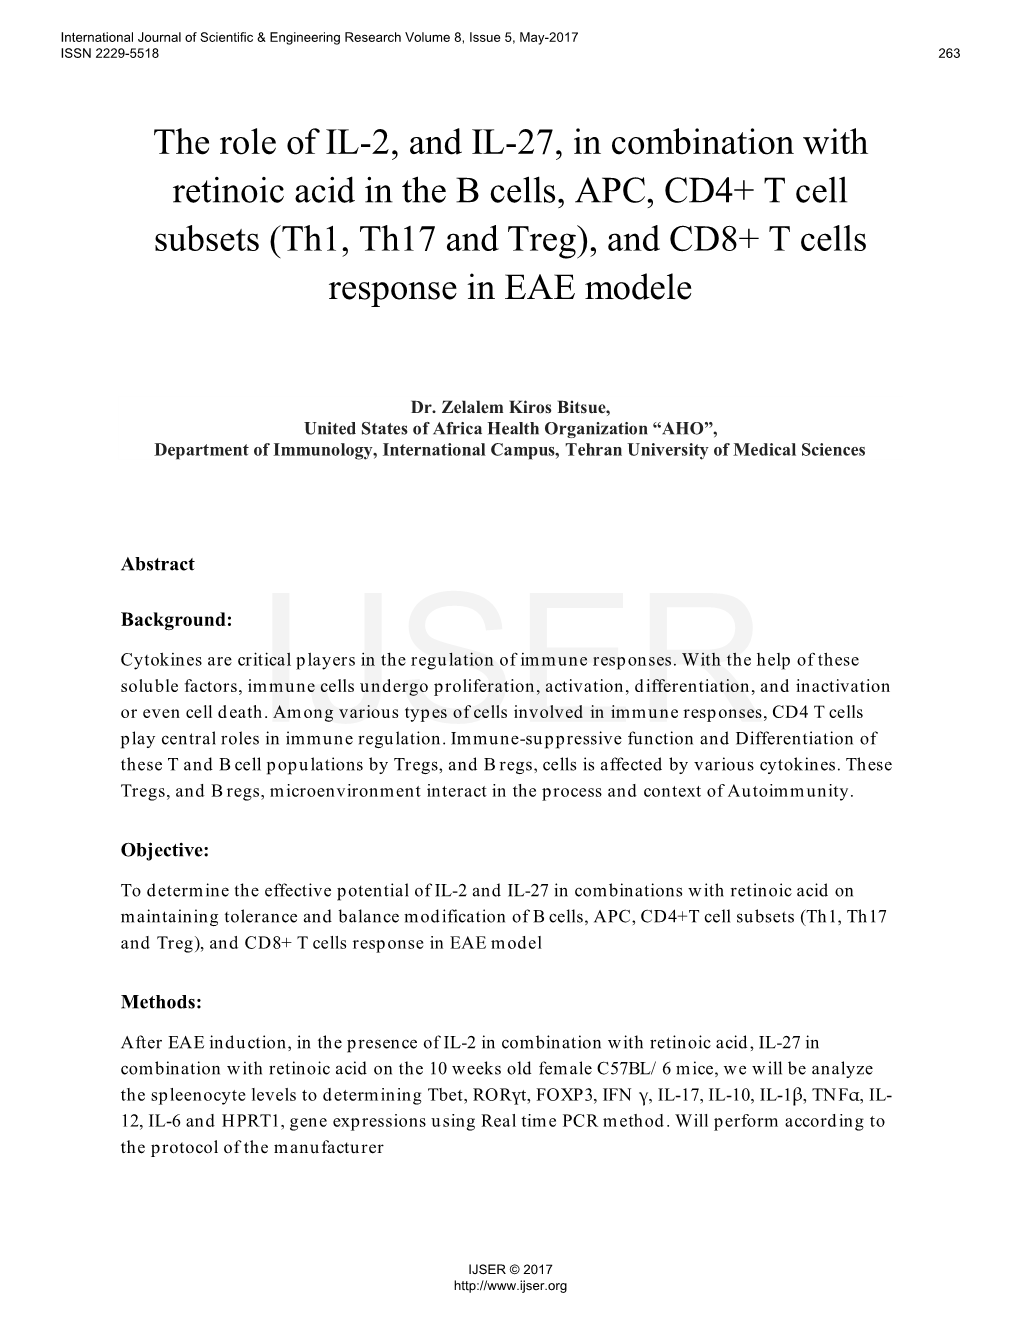 The Role of IL-2, and IL-27, in Combination with Retinoic Acid in the B Cells, APC, CD4+ T Cell Subsets (Th1, Th17 and Treg), and CD8+ T Cells Response in EAE Modele